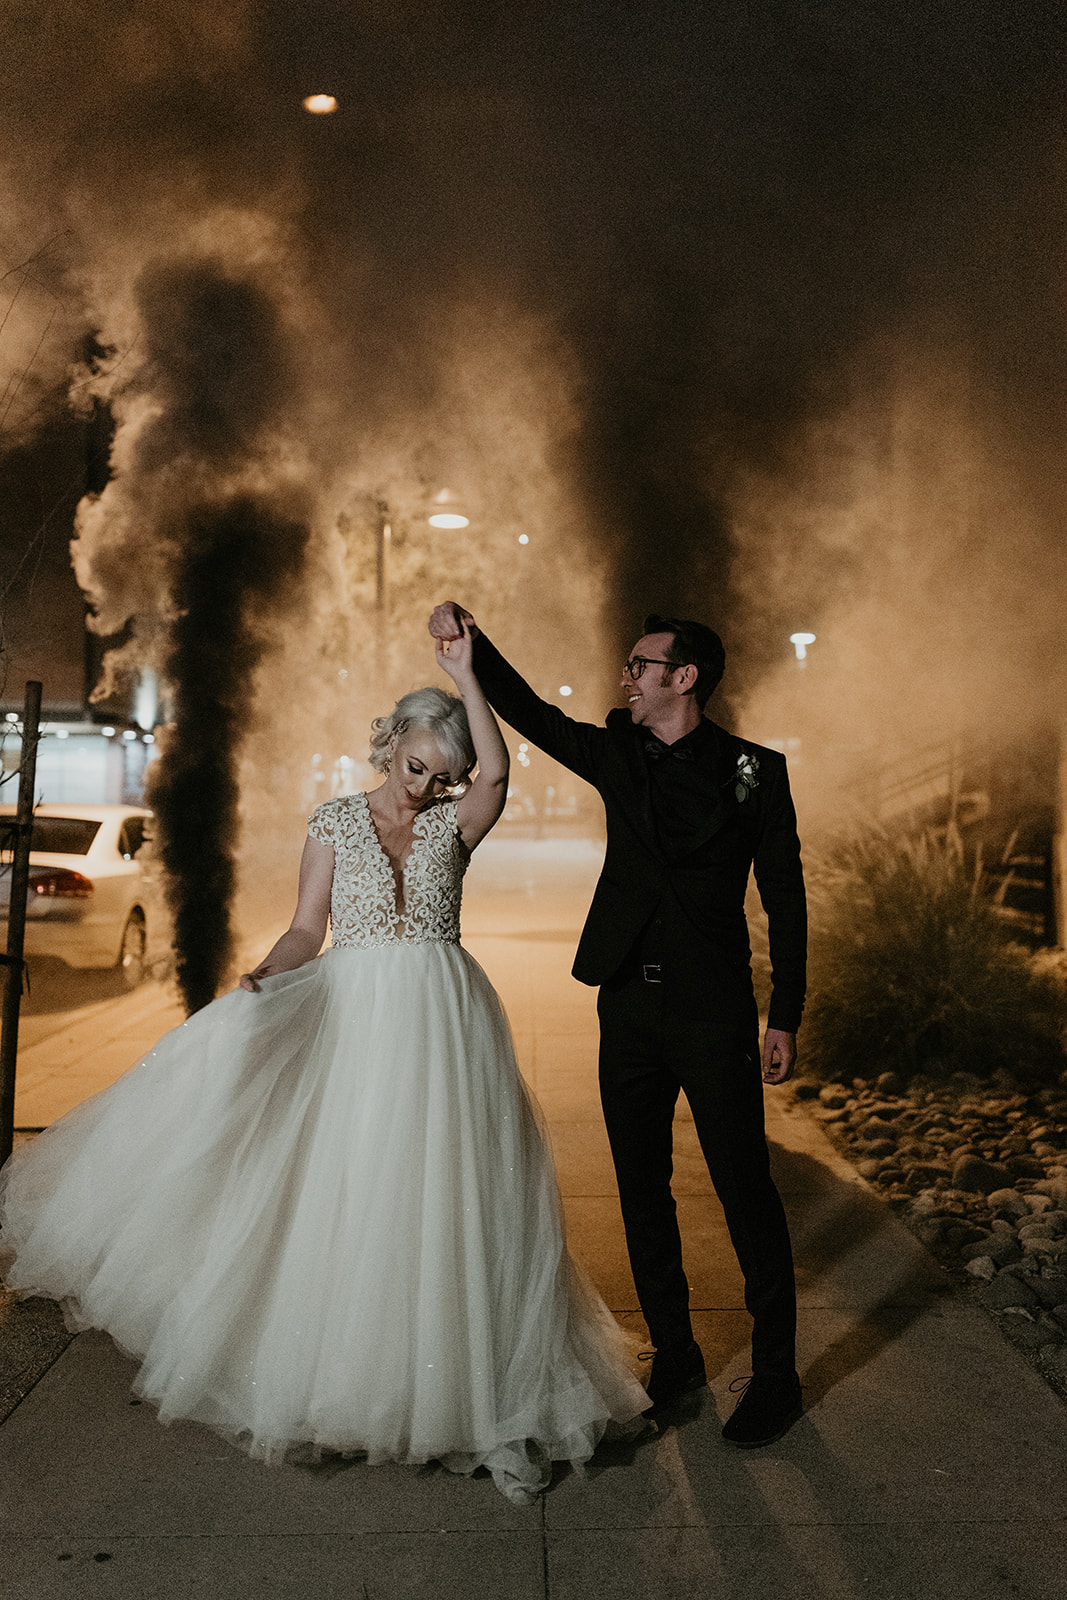 bridal couple dancing with black smoke bombs going off behind them 